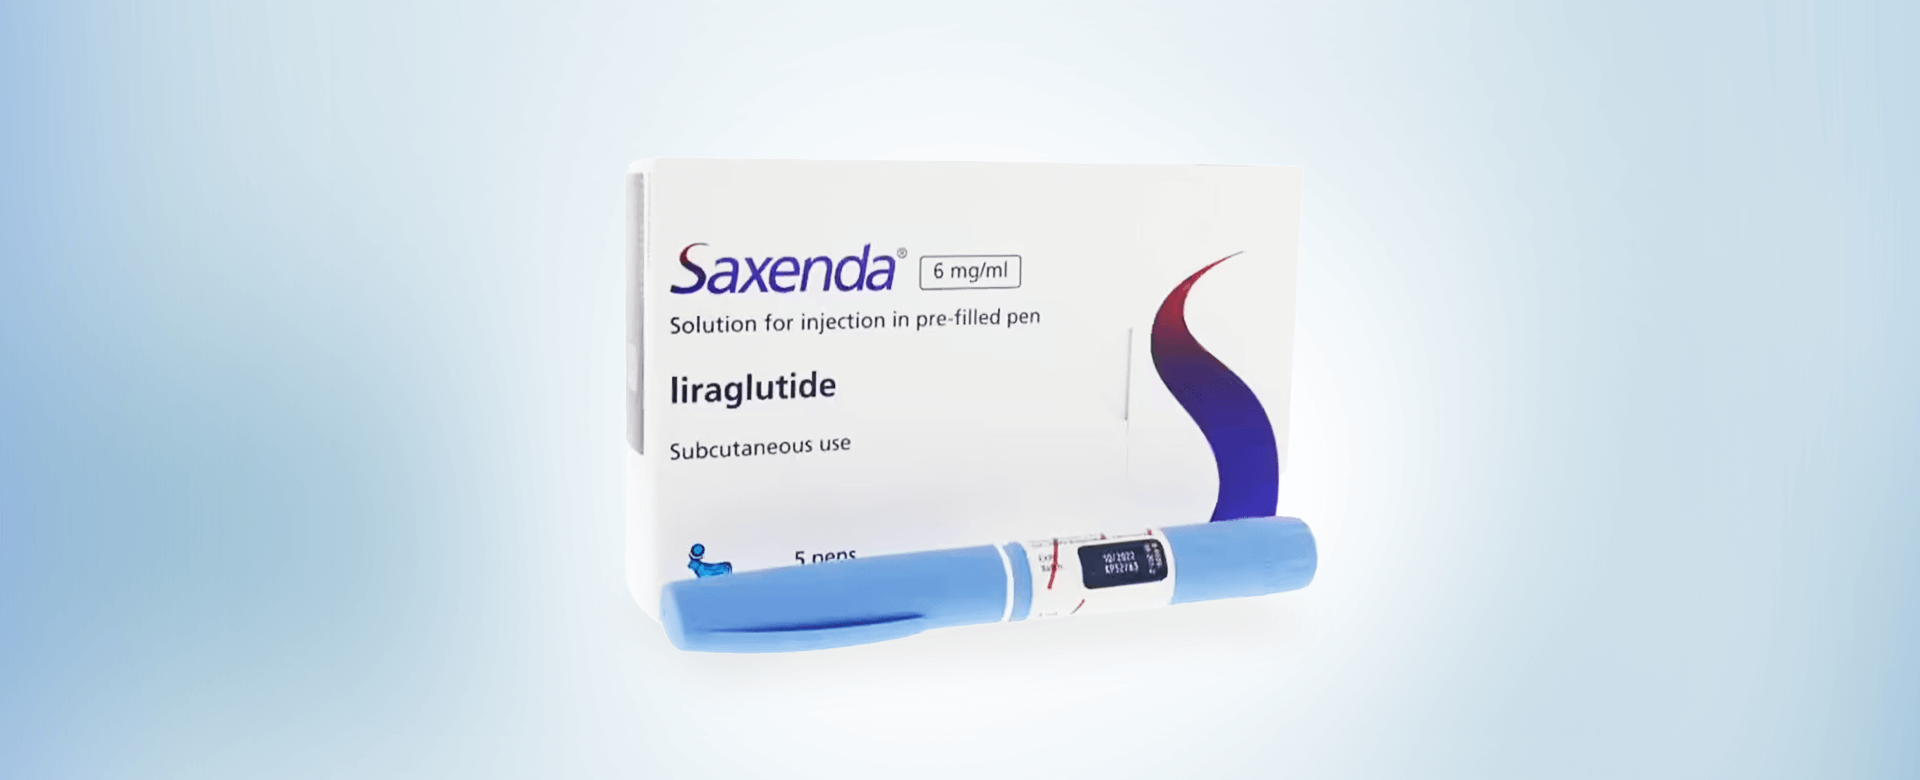 Saxenda Pen for Injection - Comparison with Human Growth Hormone (HGH)